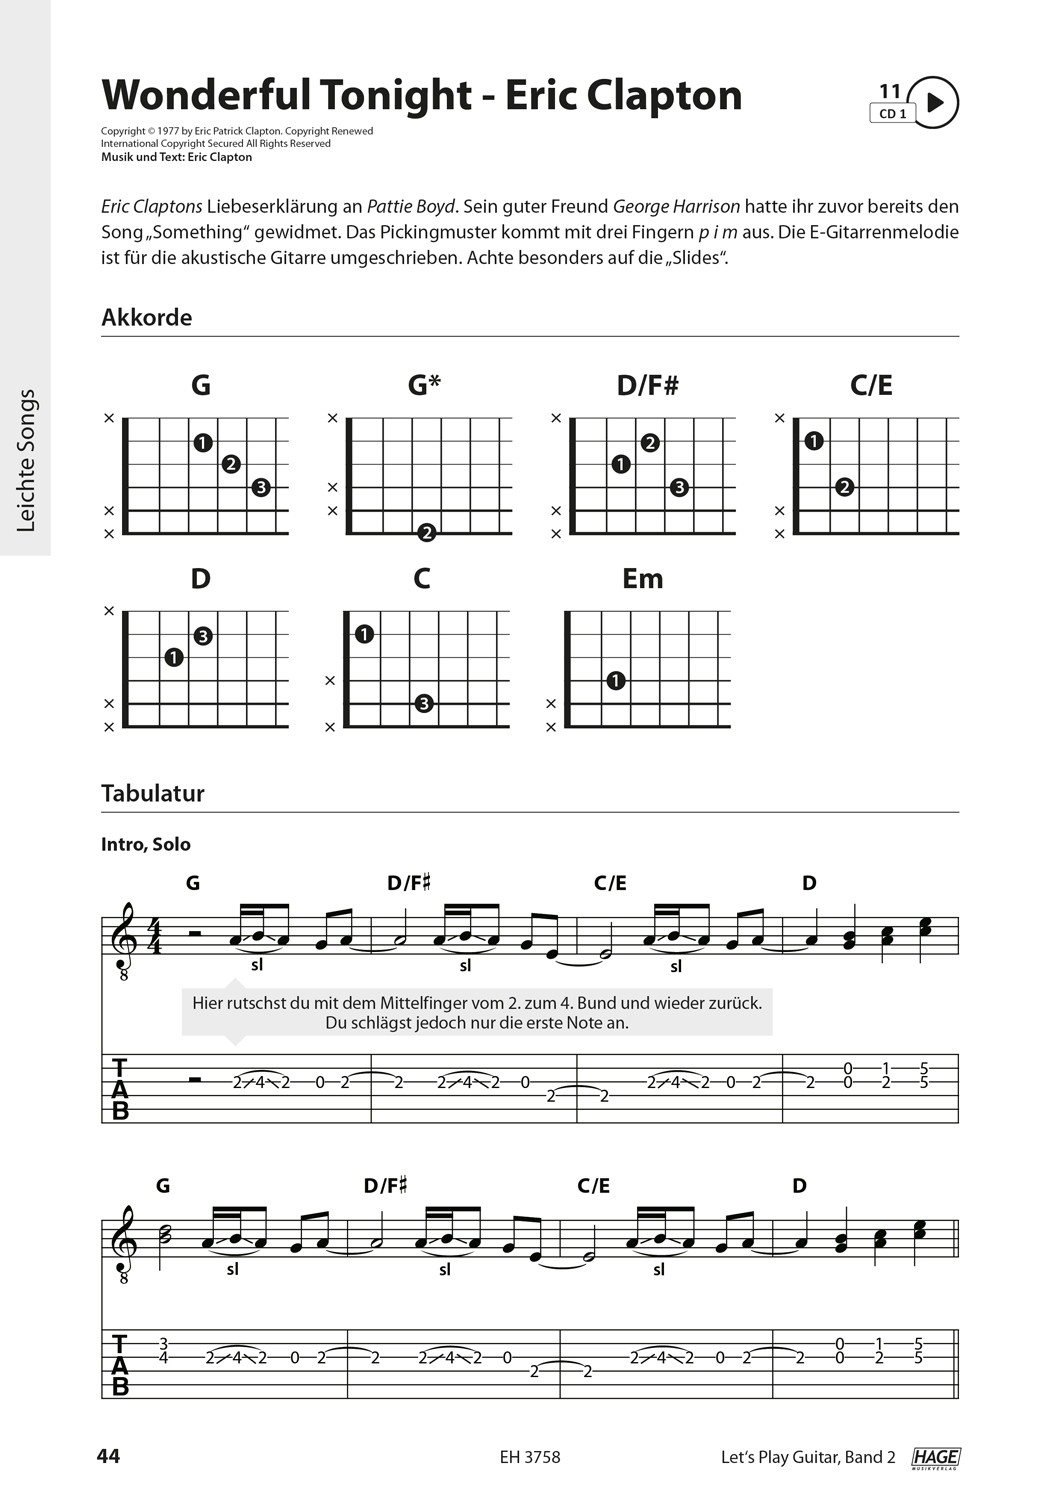 Let's Play Guitar Volume 2 (with 2 CDs und QR codes) Pages 7